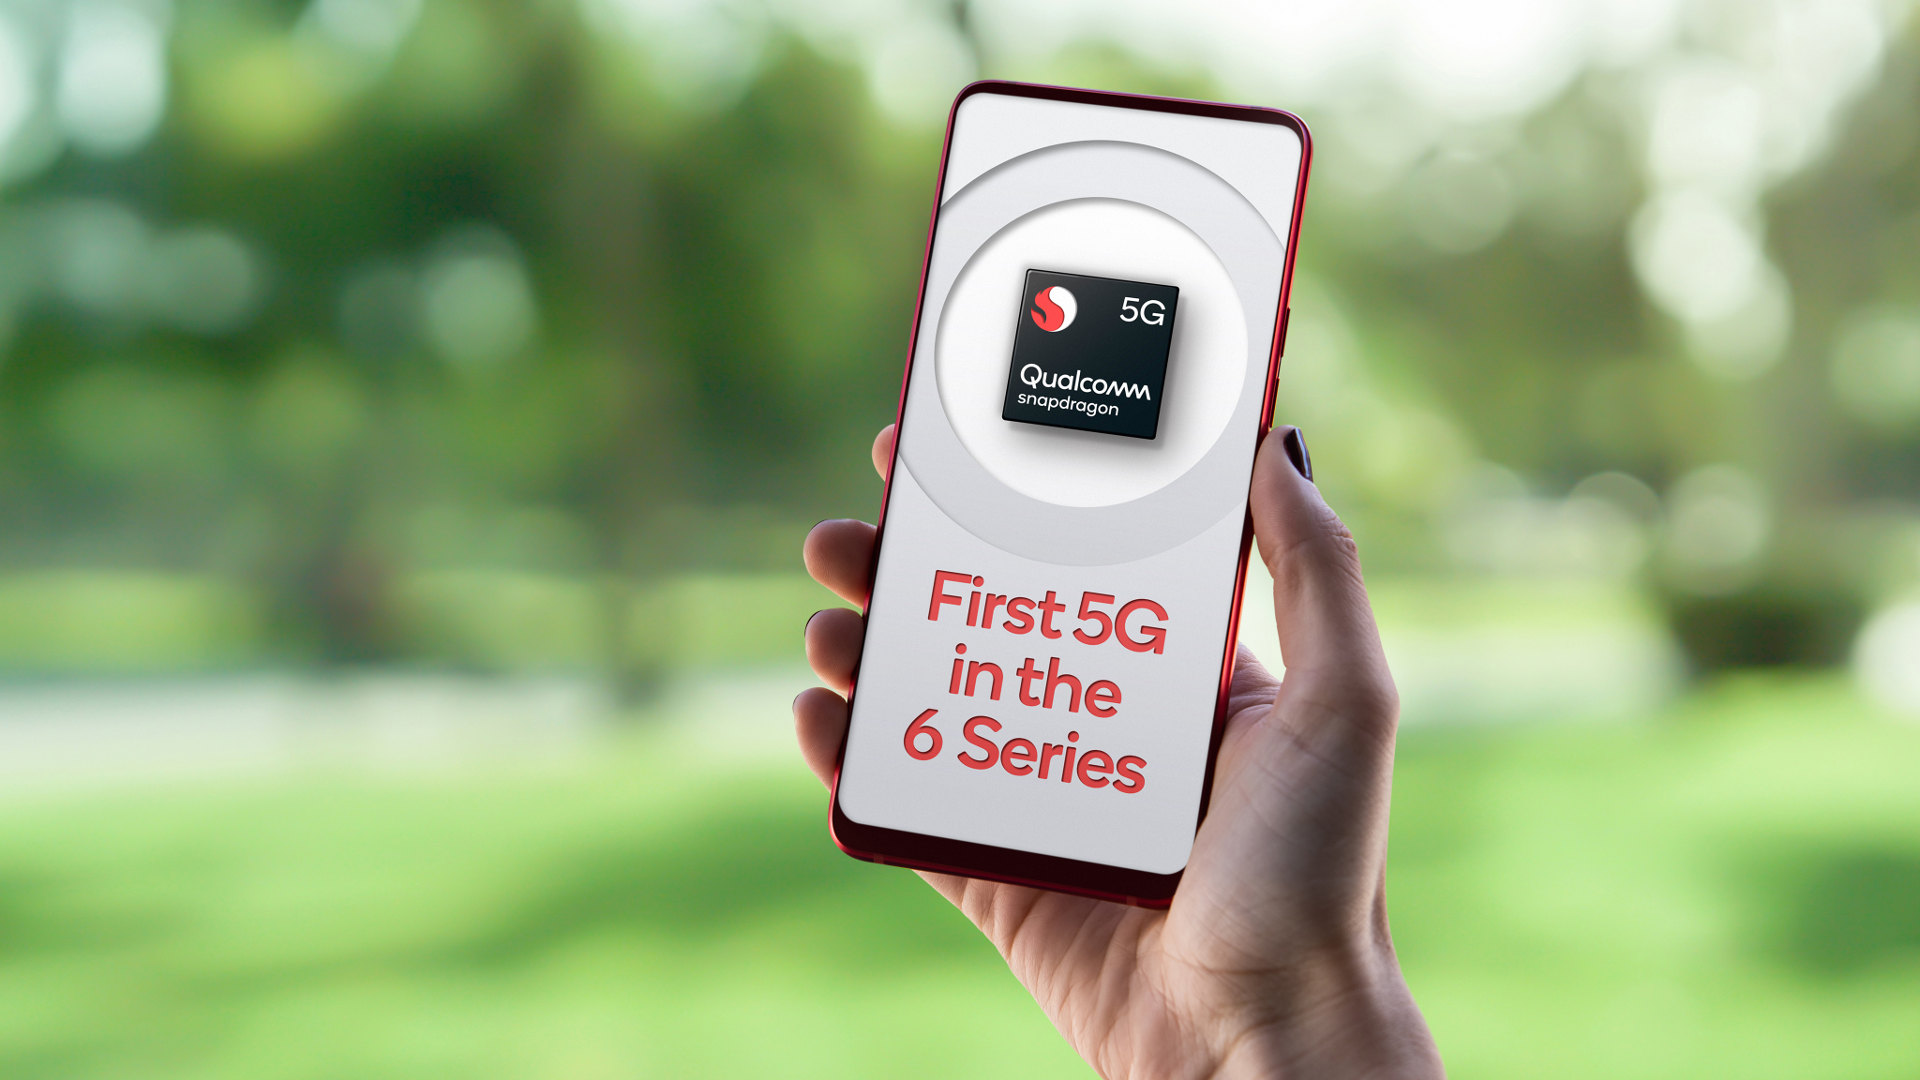 Snapdragon 690 official